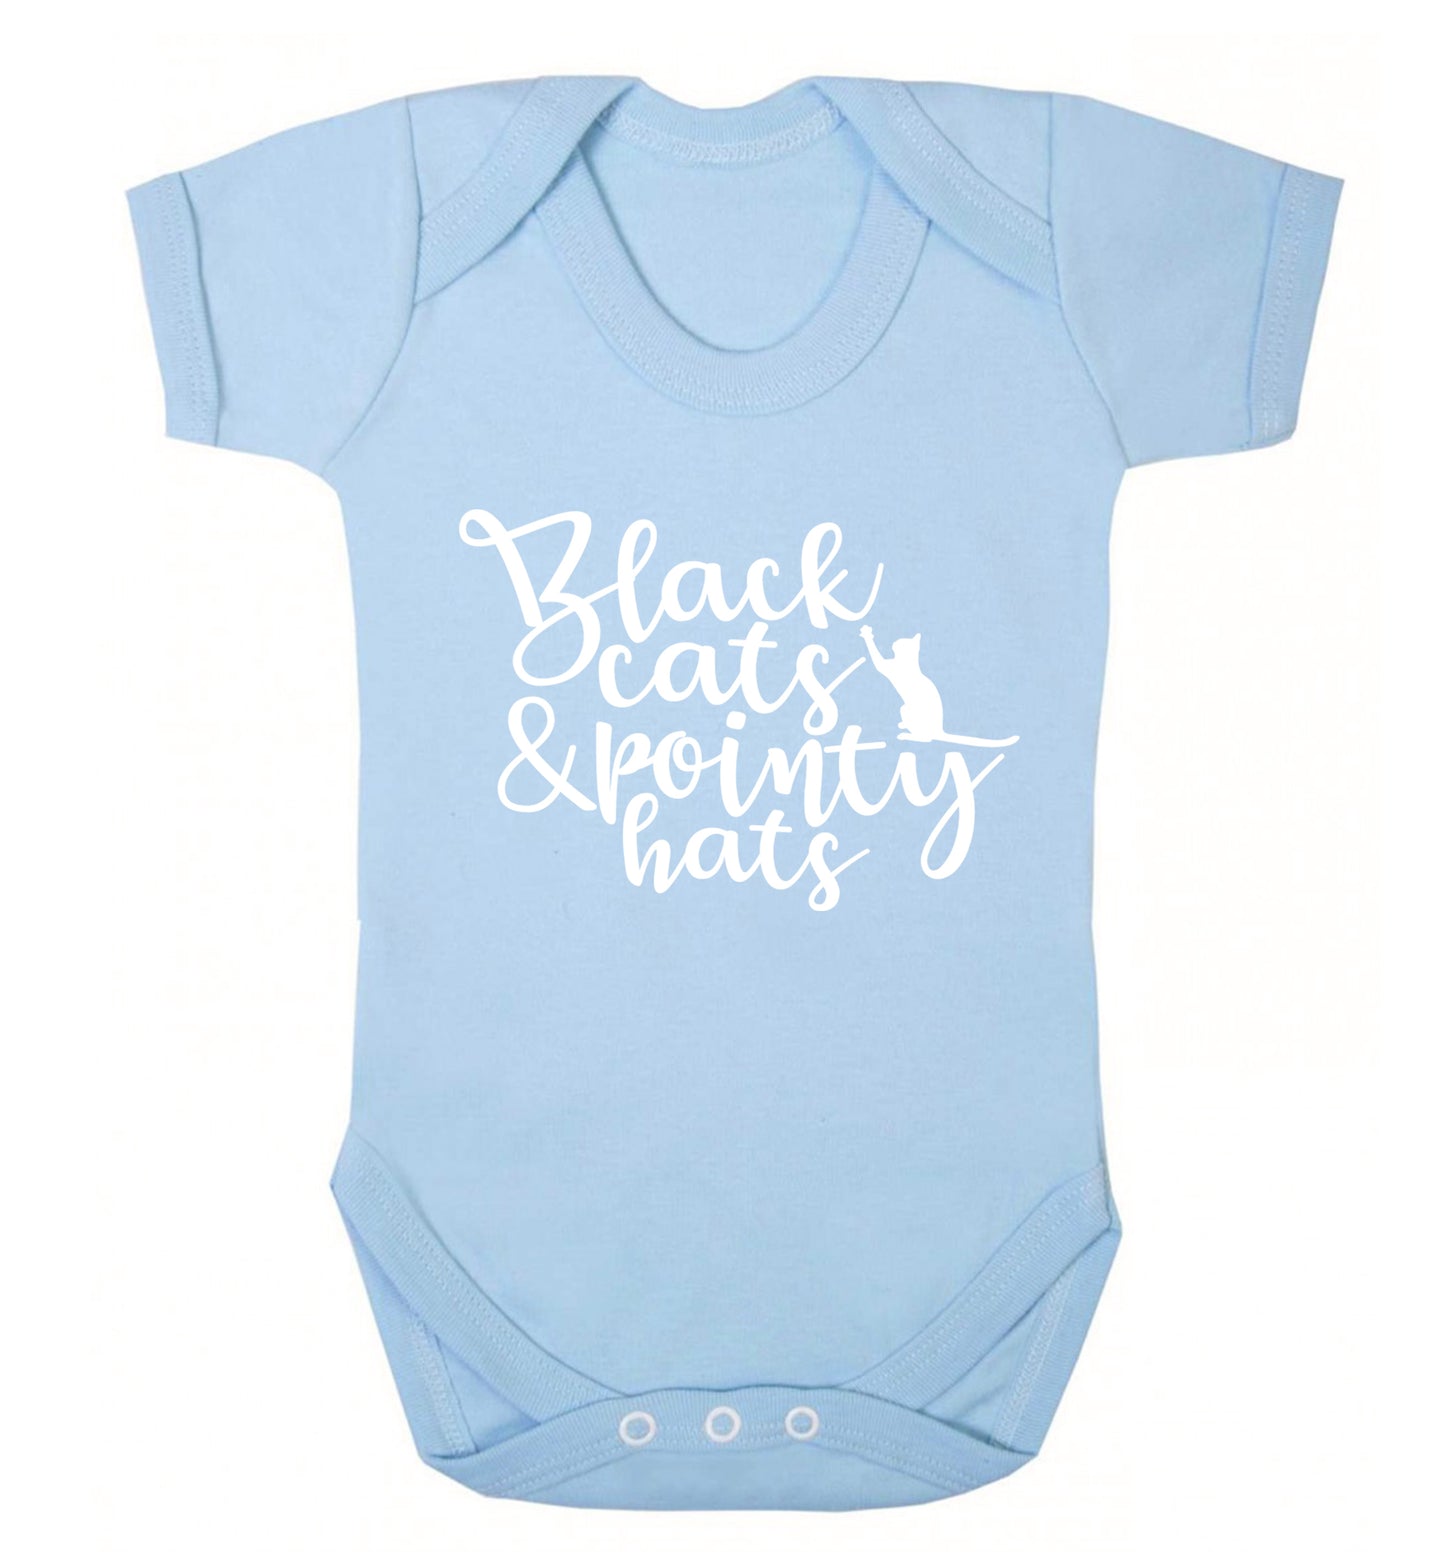 Black cats and pointy hats Baby Vest pale blue 18-24 months